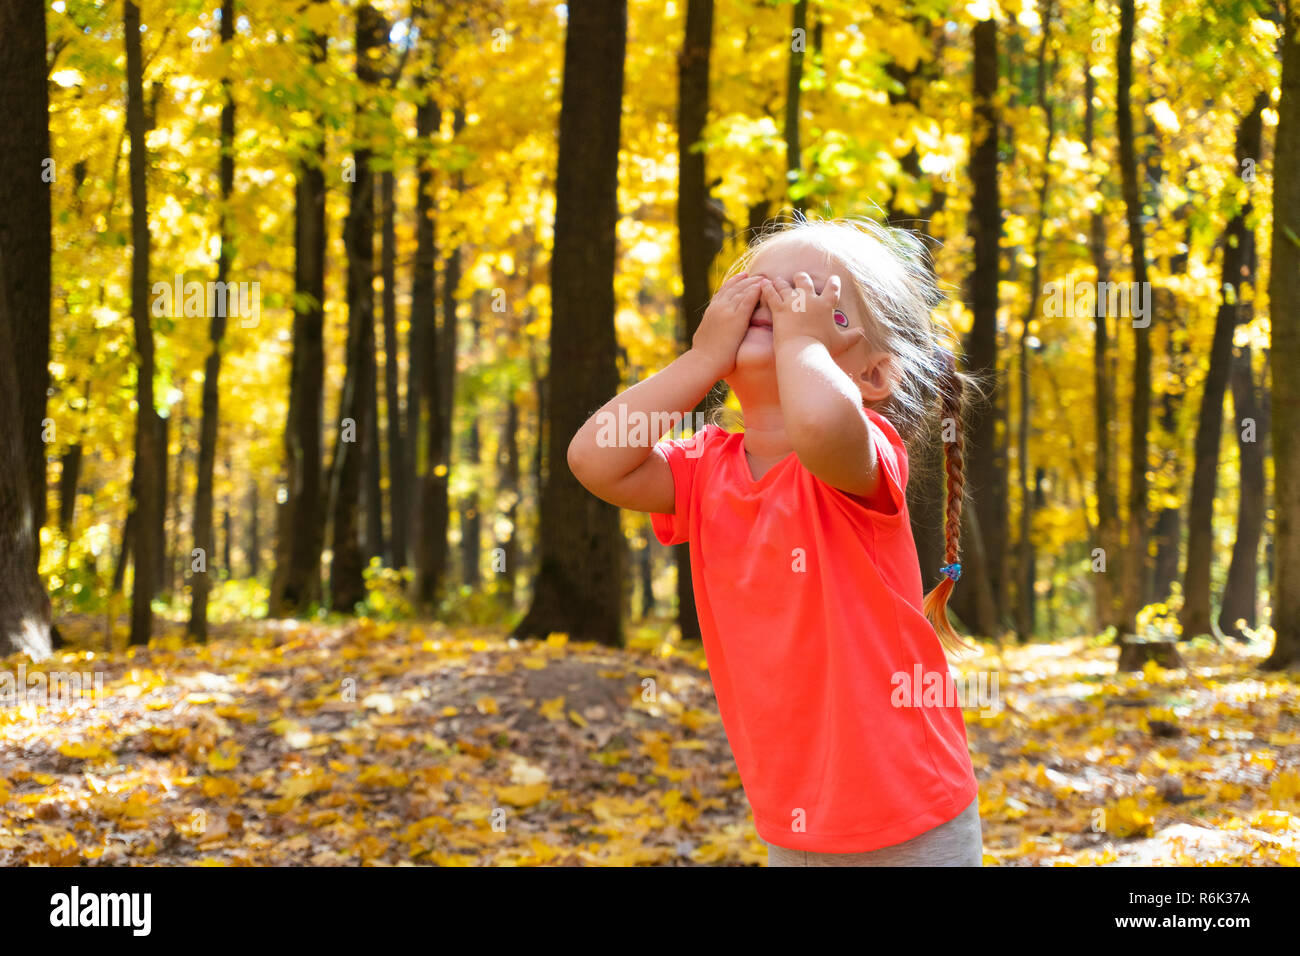 Girl playing hide and seek in autumn park Stock Photo